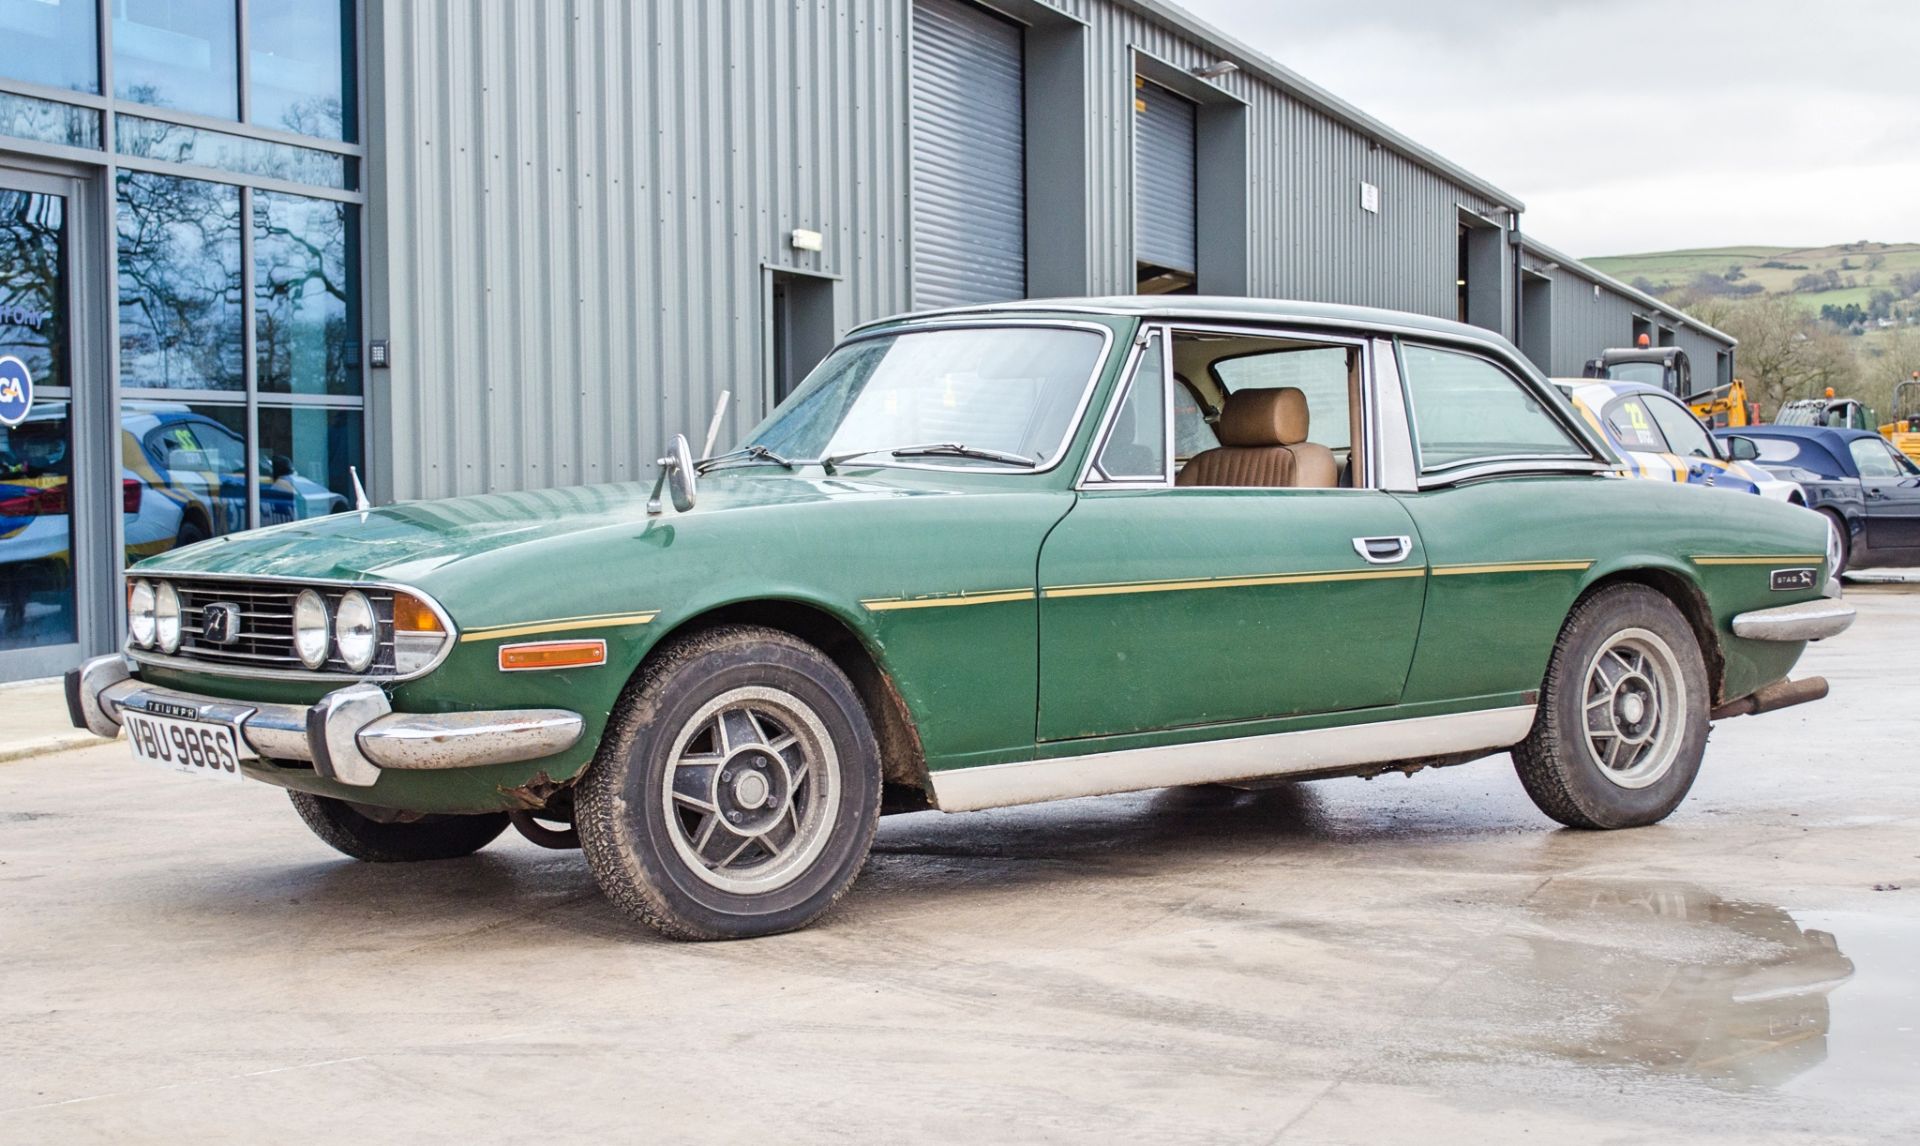 1978 Triumph Stag 3 litre manual 2 door convertible Barn Find - Image 3 of 57